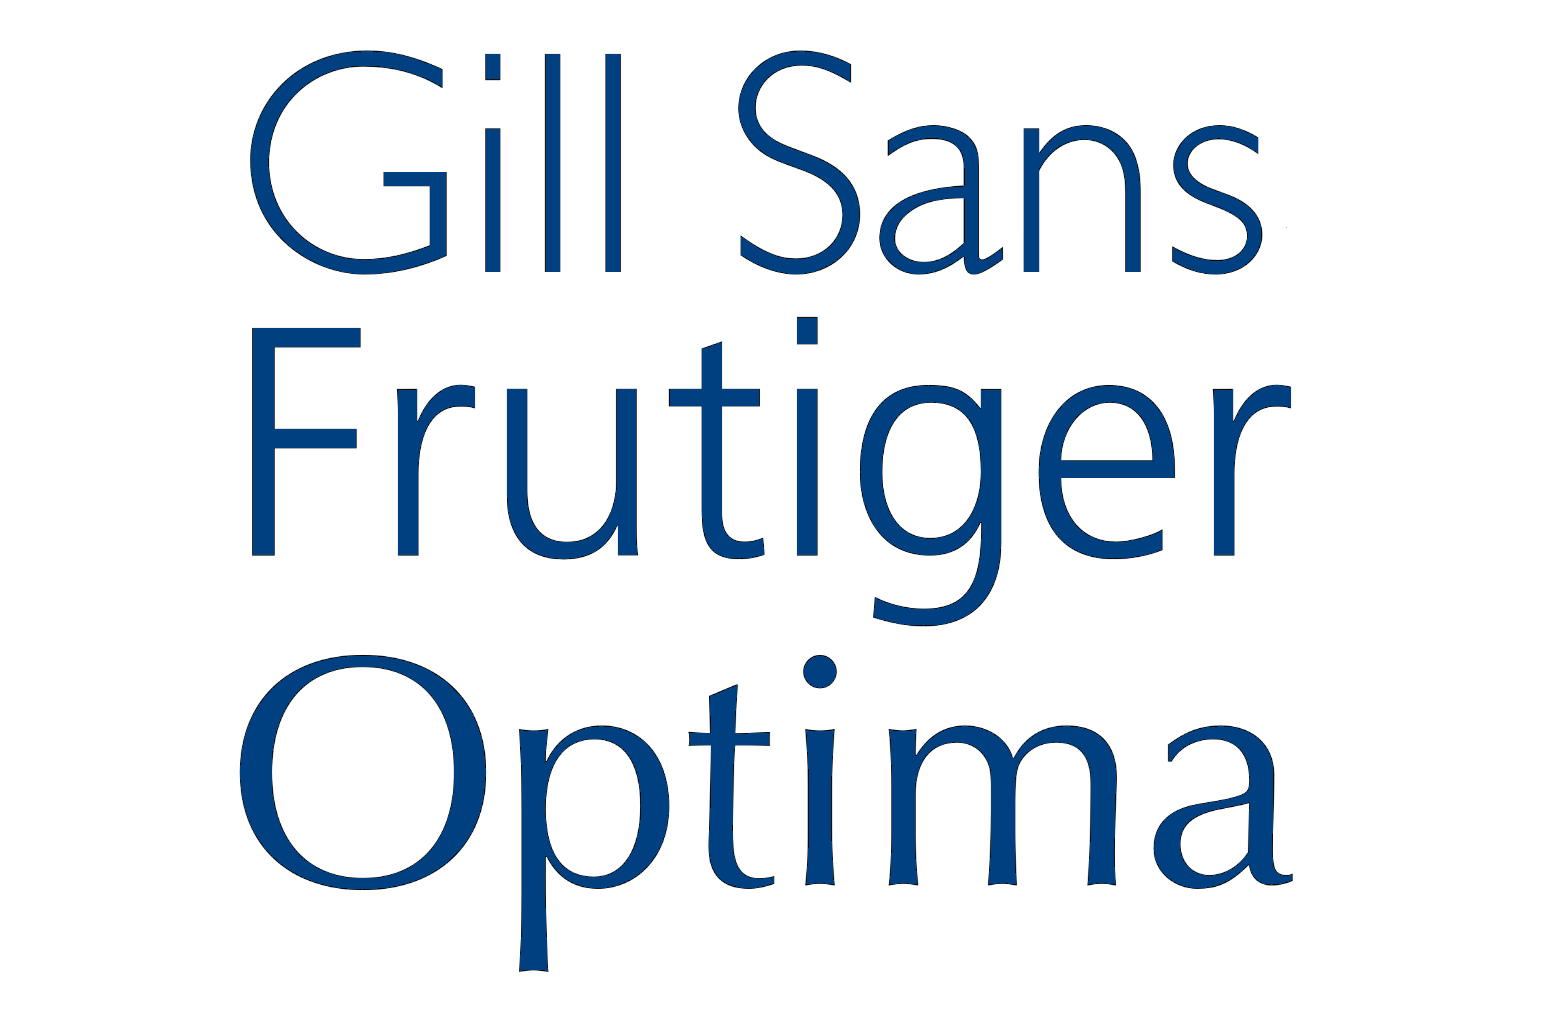 Examples of humanist sans serifs